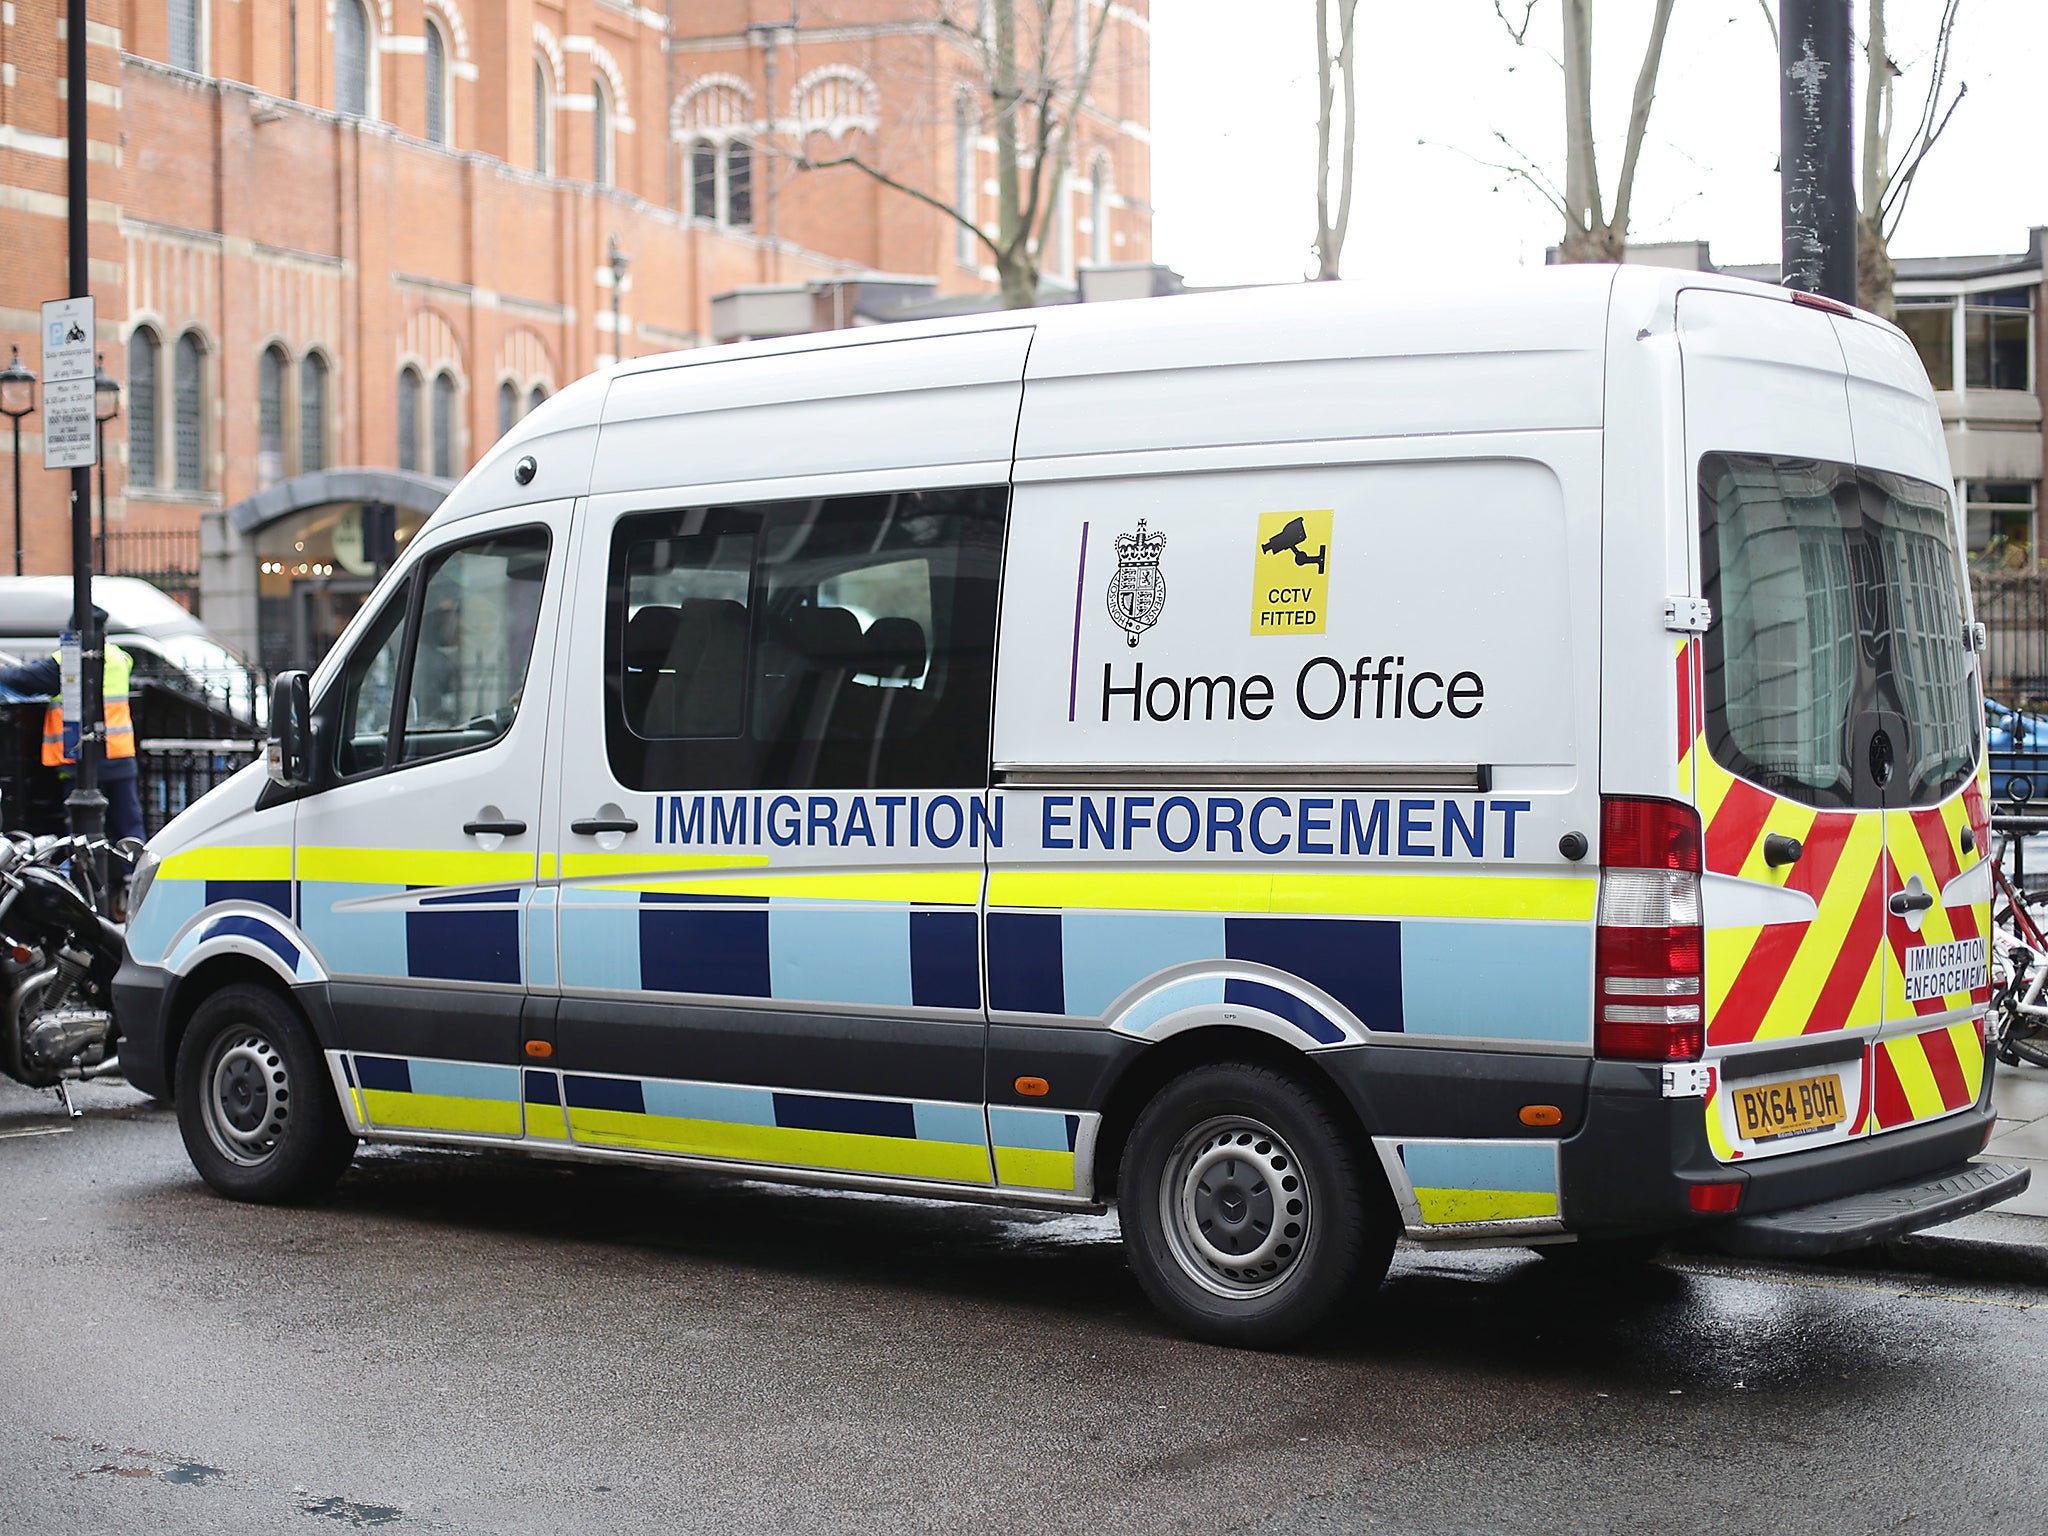 ‘This Conservative Government seems intent on turning doctors, landlords and now your local bank manager into immigration enforcement officials,’ said Ed Davey